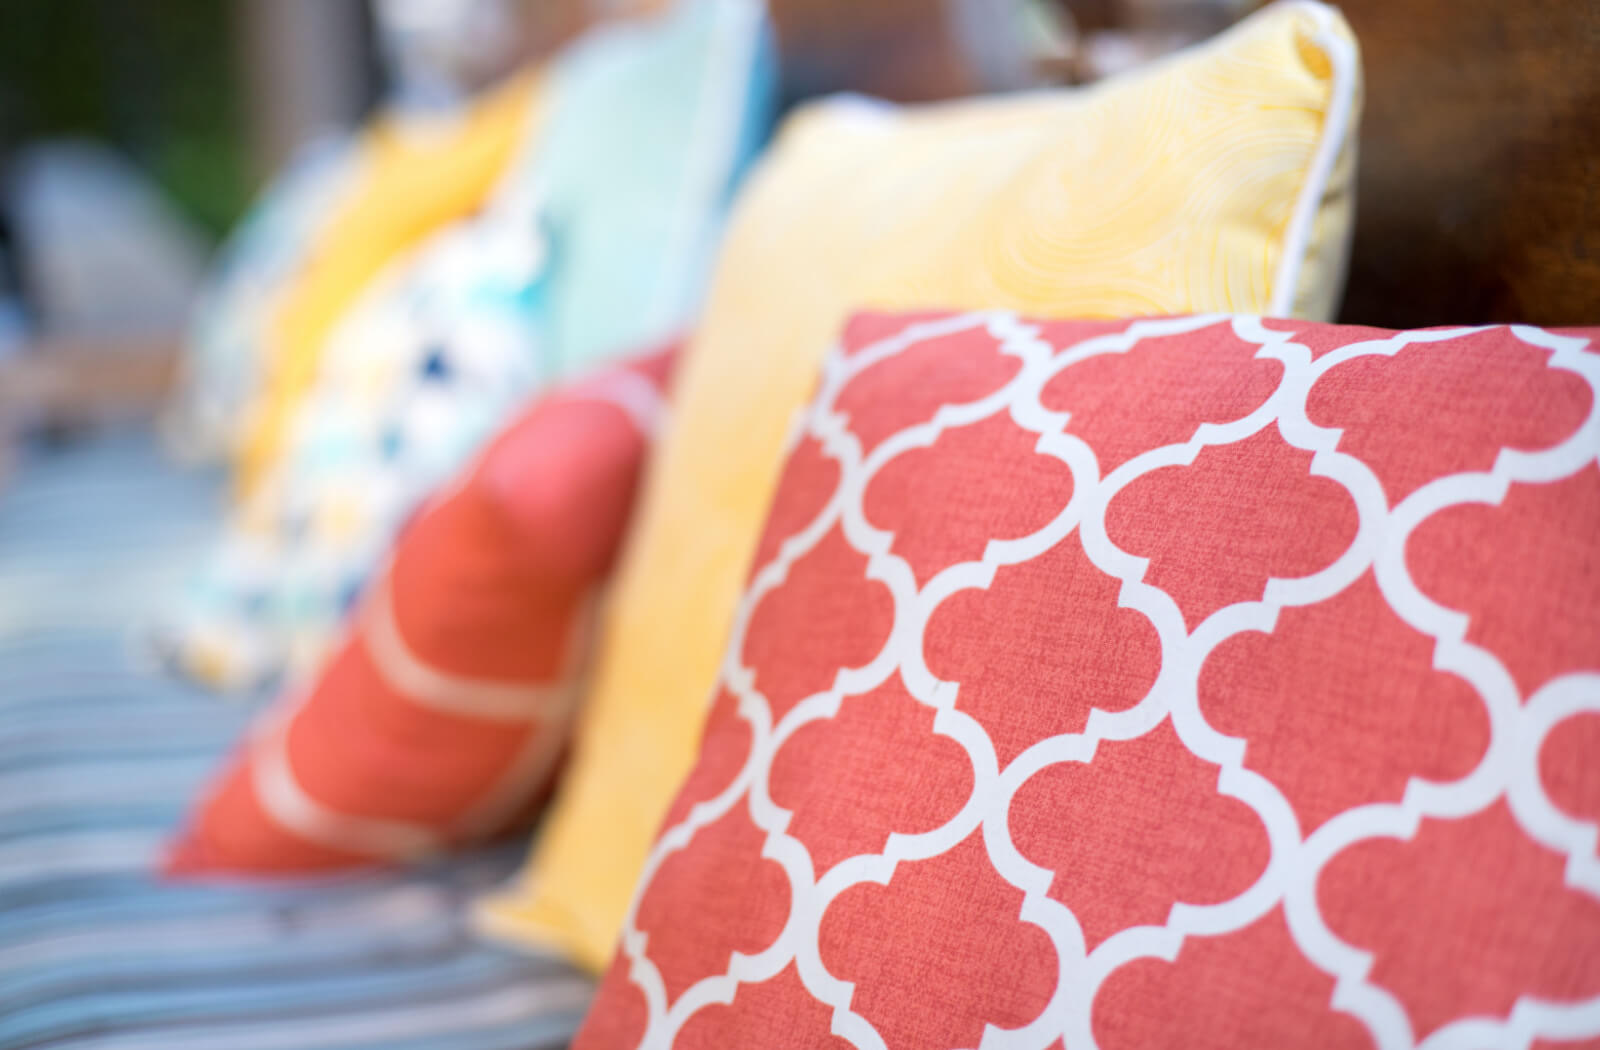 A close up of orange and yellow patterned throw pillows on an outdoor bench with a blue, striped cushion underneath the pillows.